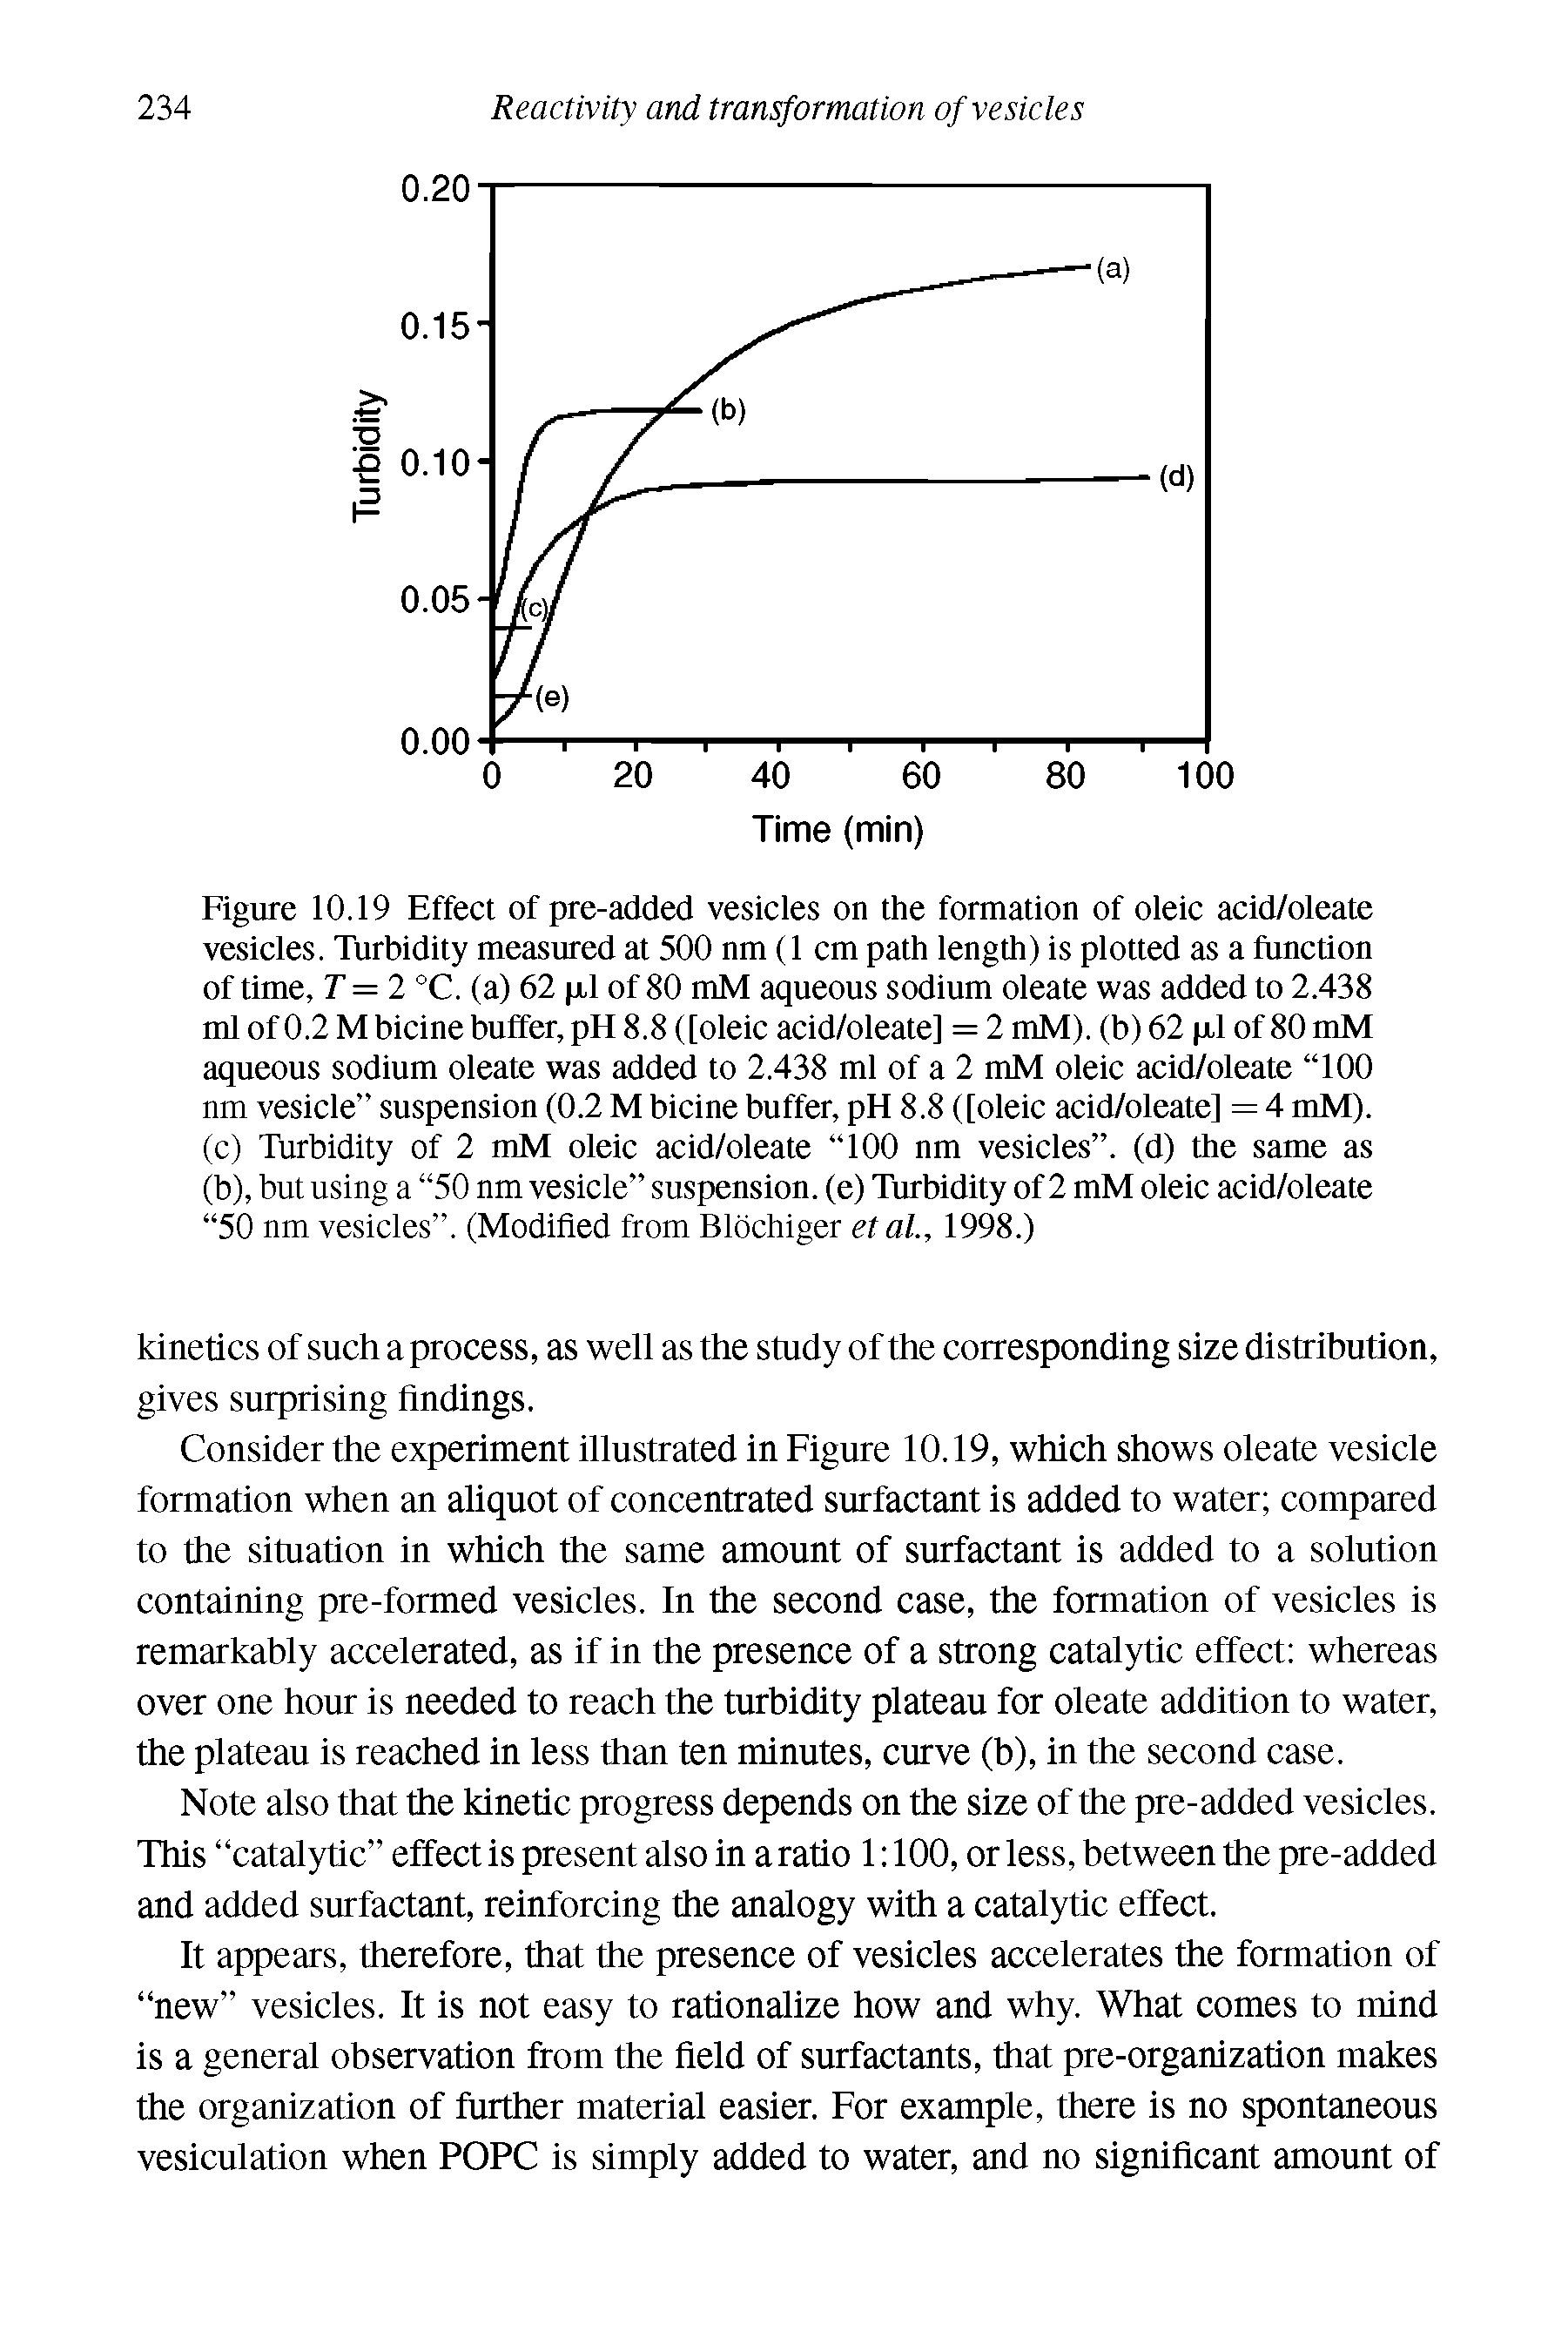 Figure 10.19 Effect of pre-added vesicles on the formation of oleic acid/oleate vesicles. Turbidity measured at 500 nm (1 cm path length) is plotted as a function of time, T=2°C. (a) 62 p,l of 80 mM aqueous sodium oleate was added to 2.438 ml of0.2Mbicine buffer, pH 8.8 ([oleic acid/oleate] = 2 mM). (b)62 p,l of 80mM aqueous sodium oleate was added to 2.438 ml of a 2 mM oleic acid/oleate 100 nm vesicle suspension (0.2 M bicine buffer, pH 8.8 ([oleic acid/oleate] = 4 mM). (c) Turbidity of 2 mM oleic acid/oleate 100 nm vesicles , (d) the same as (b), but using a 50 nm vesicle suspension, (e) Turbidity of 2 mM oleic acid/oleate 50 nm vesicles . (Modified from Blochiger etal, 1998.)...